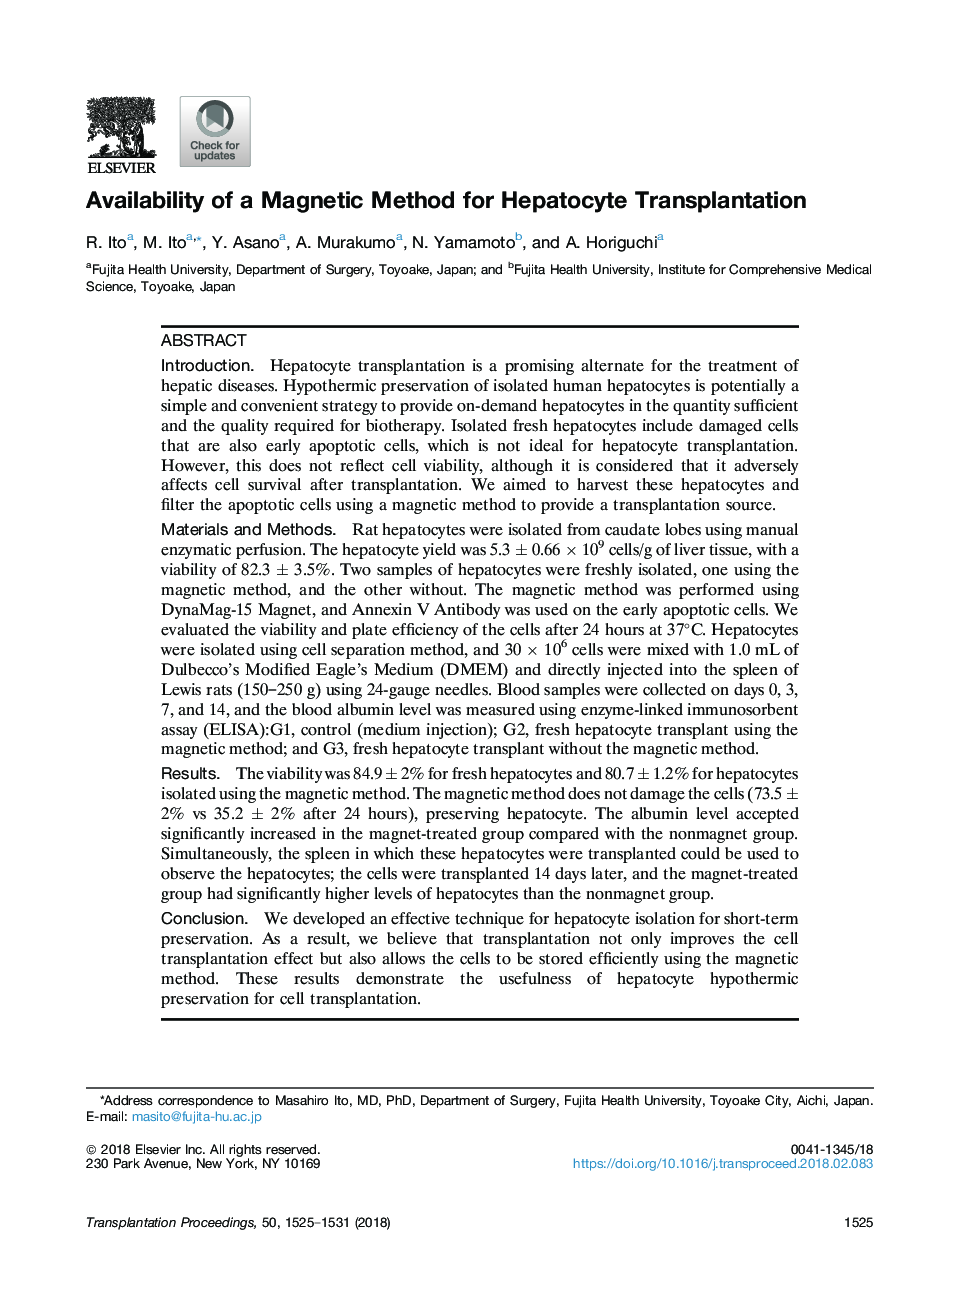 Availability of a Magnetic Method for Hepatocyte Transplantation